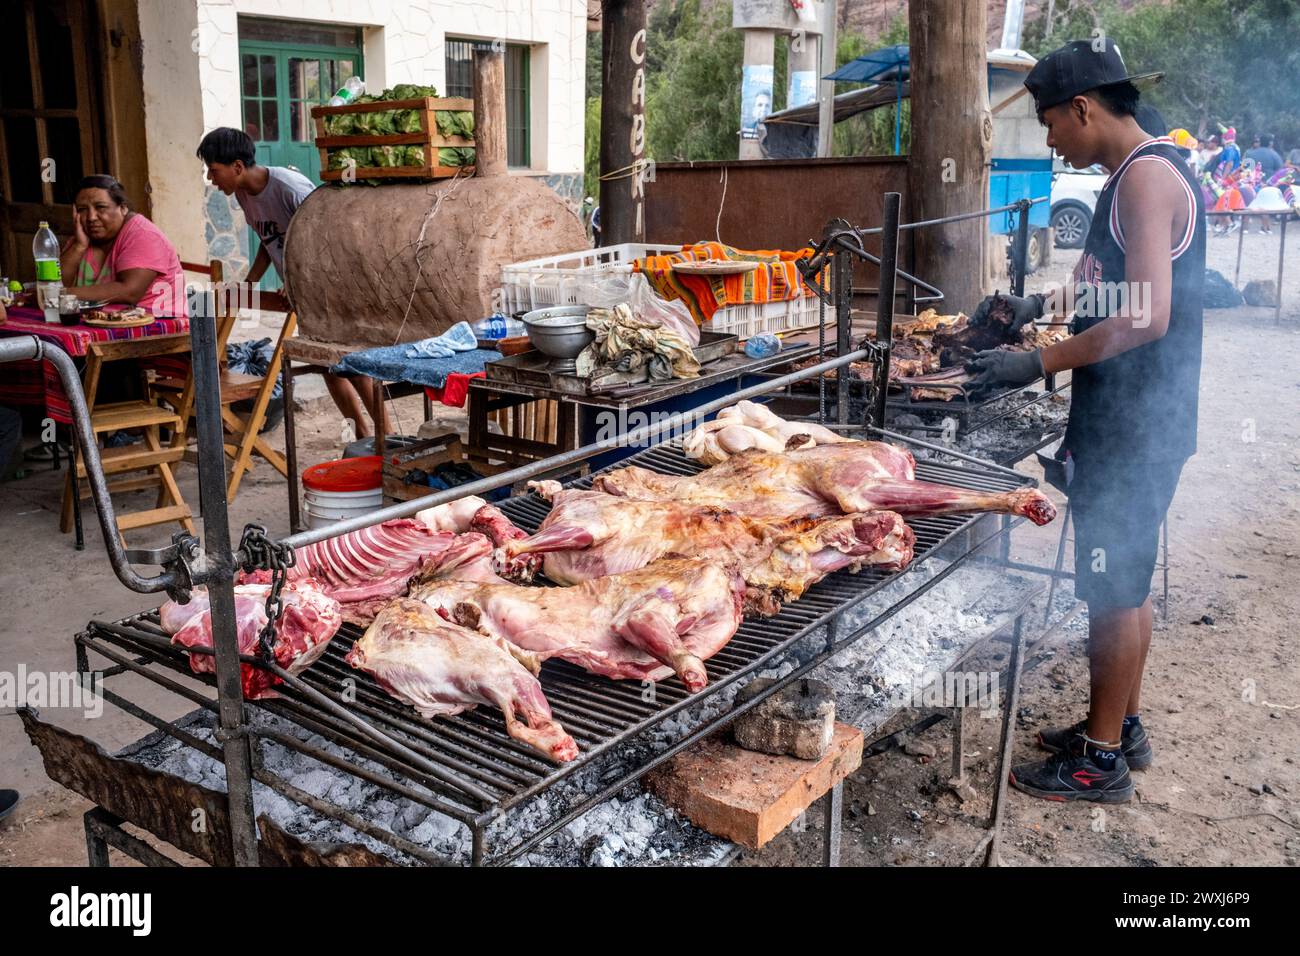 Meat Cooking On A Barbecue Outside A Restaurant In Tilcara, Jujuy Province, Argentina. Stock Photo